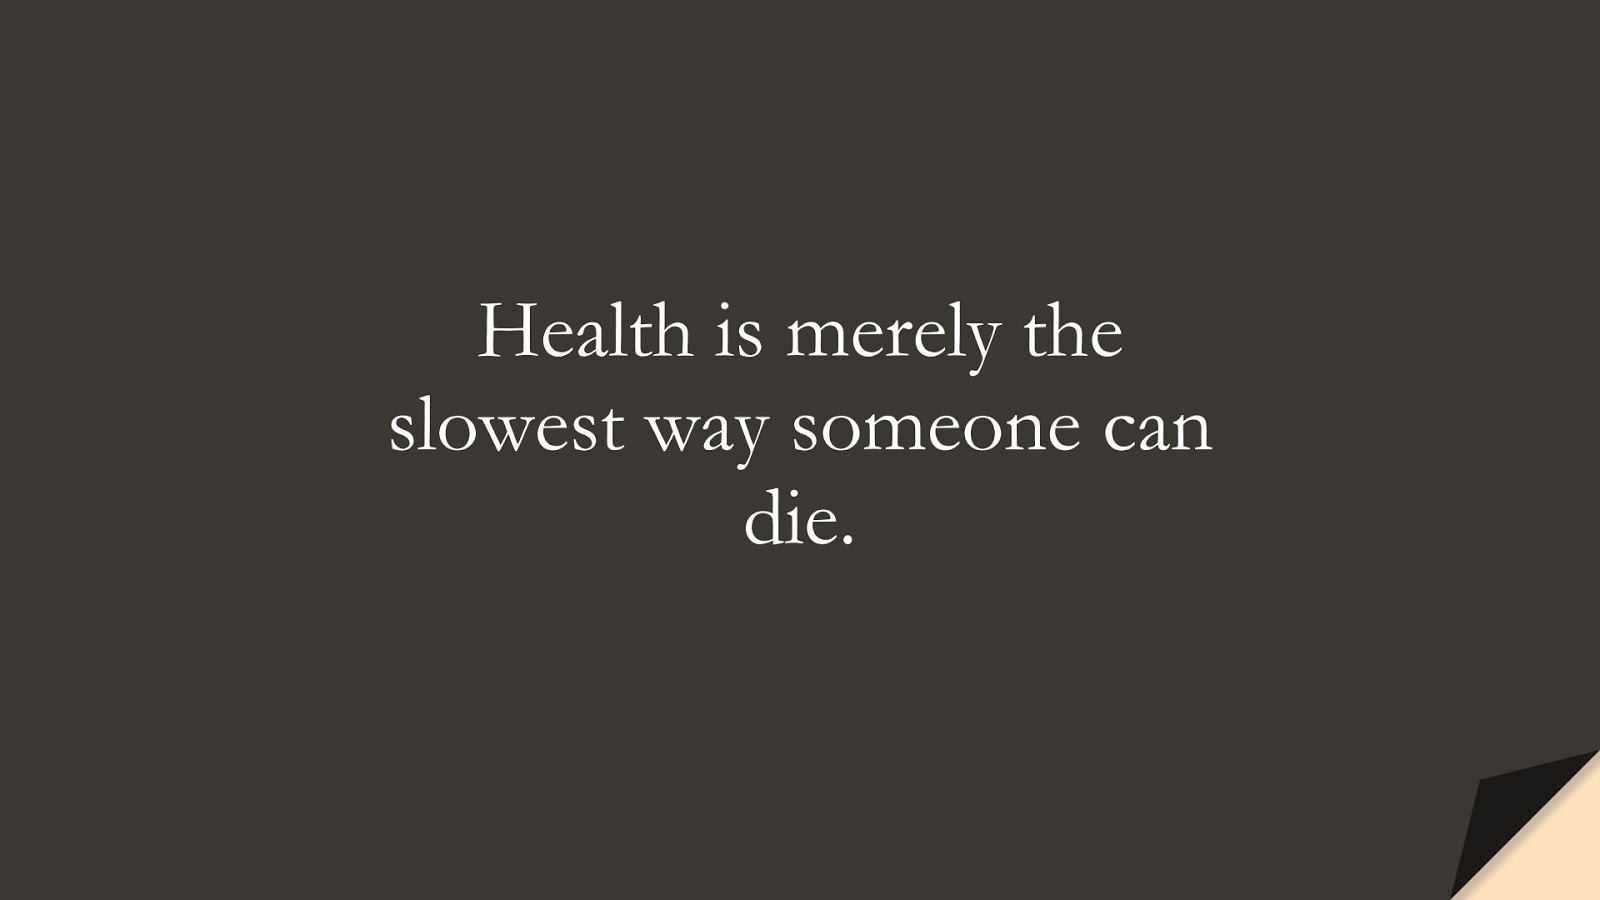 Health is merely the slowest way someone can die.FALSE